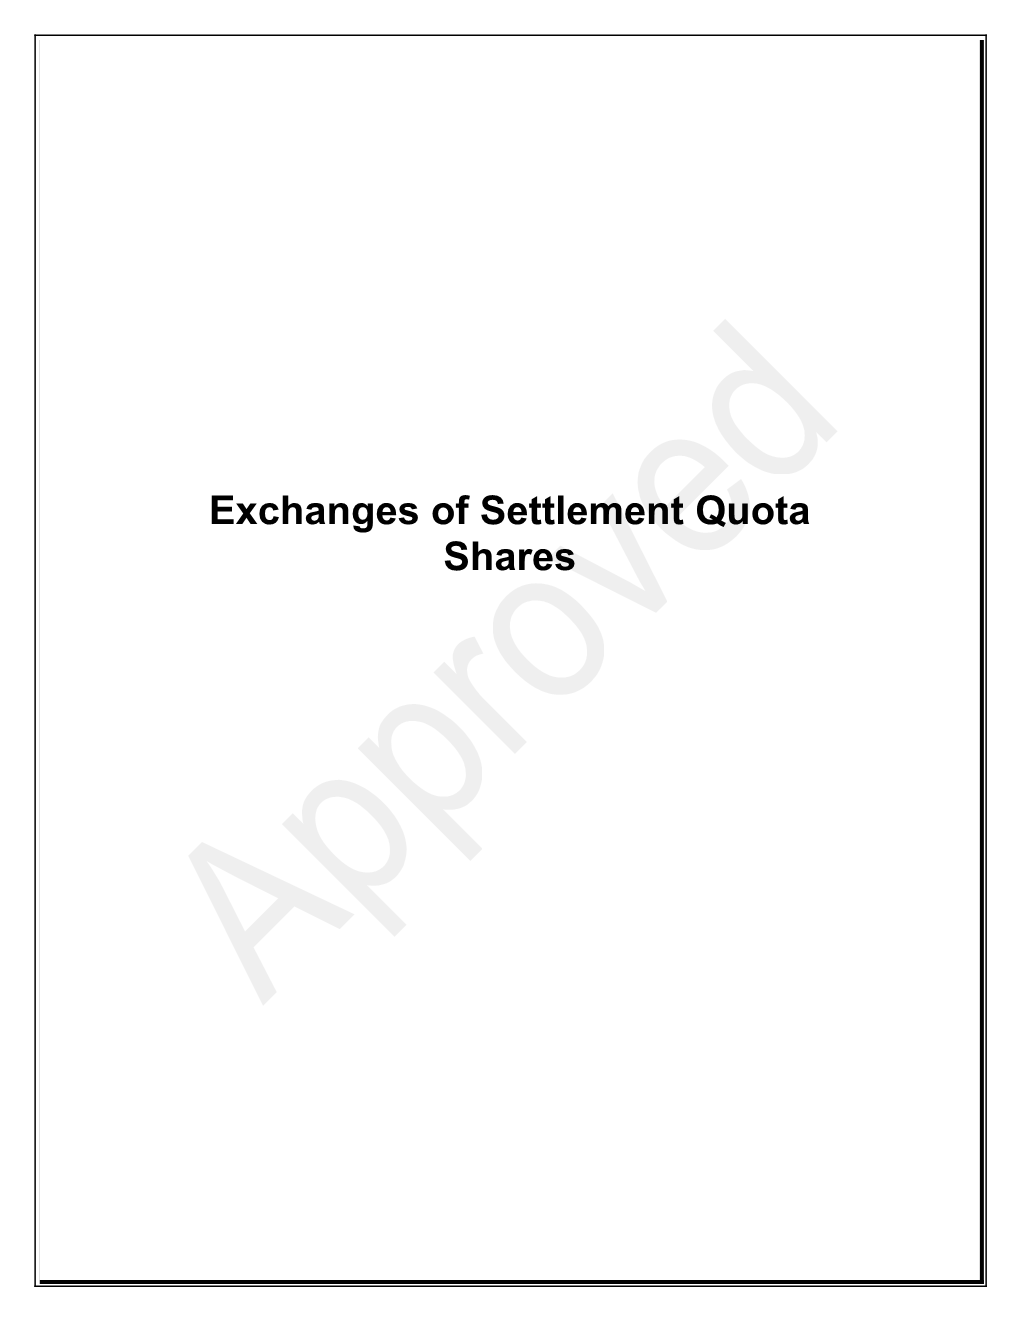 Exchanges of Quota Under S 173 & S174 of the MF Act